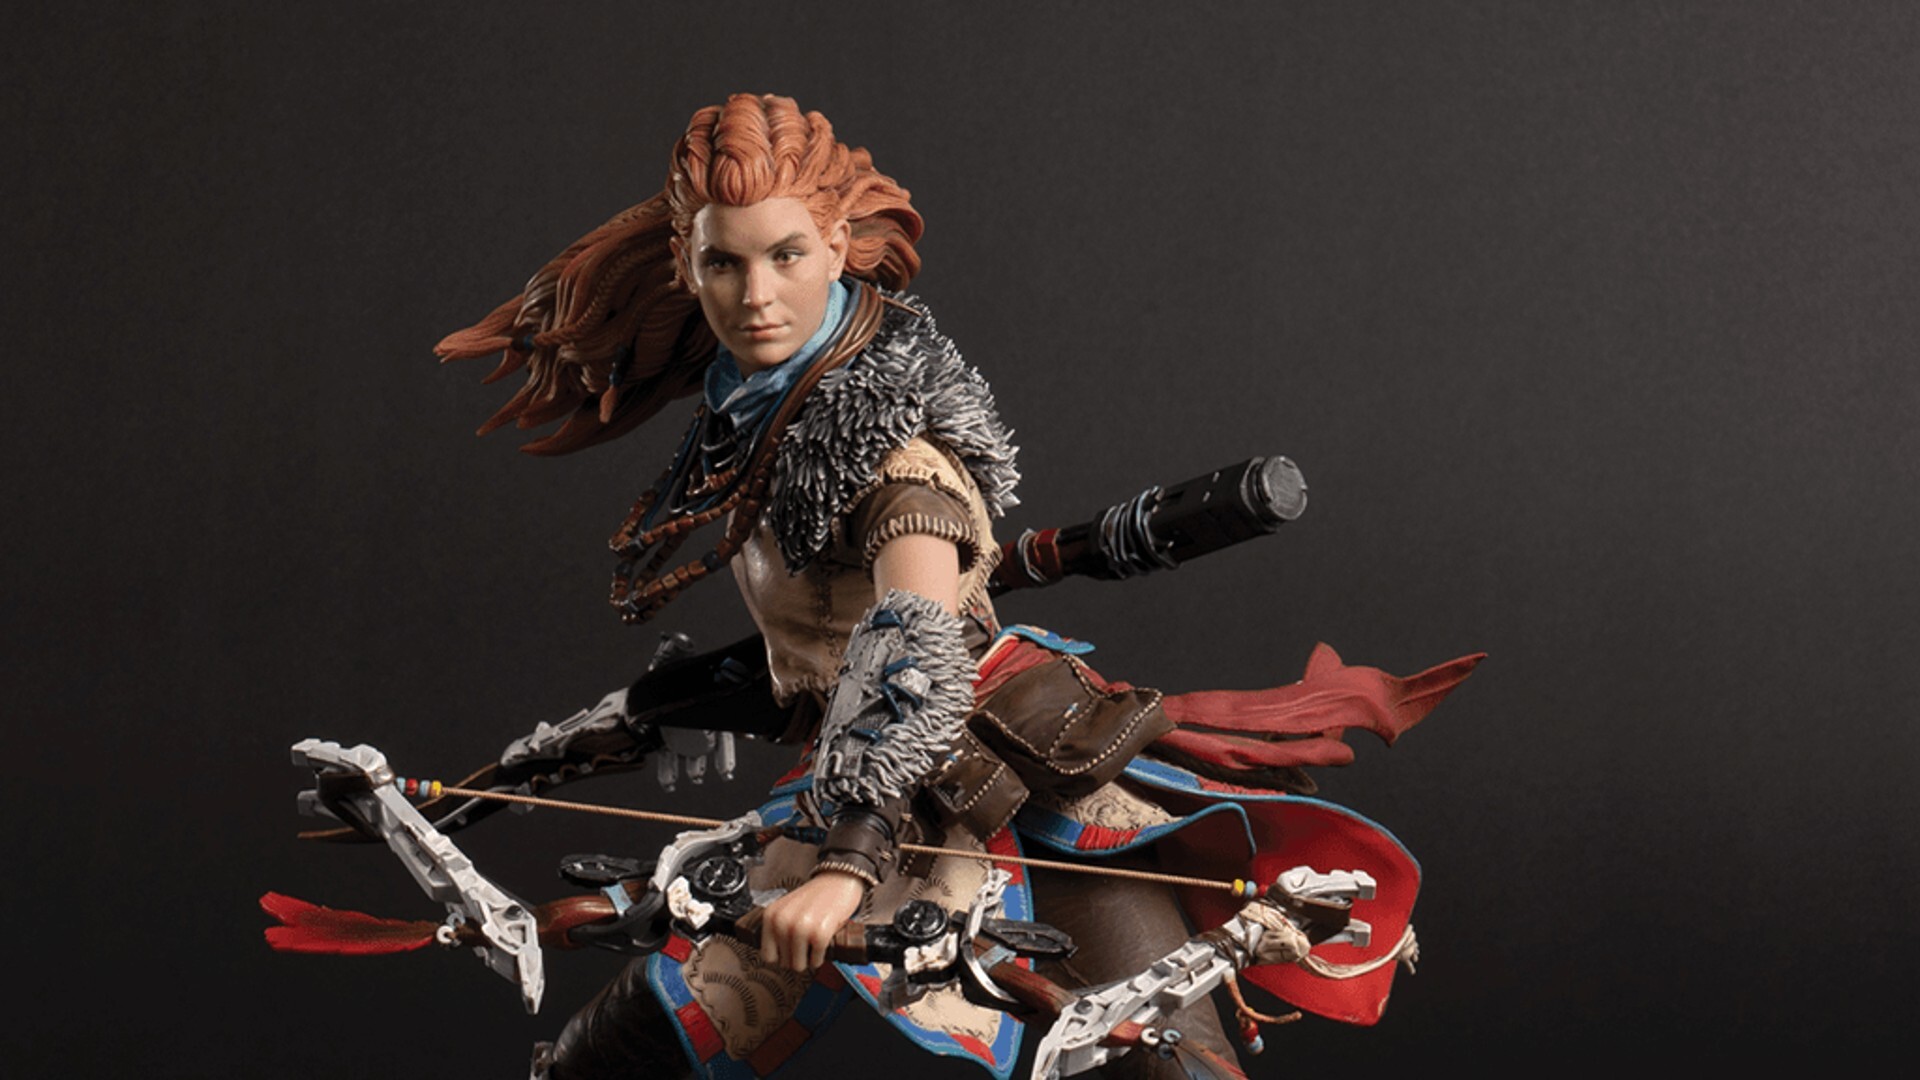 They're only making 2,000 of these super-realistic Horizon Forbidden West Aloy statues thumbnail